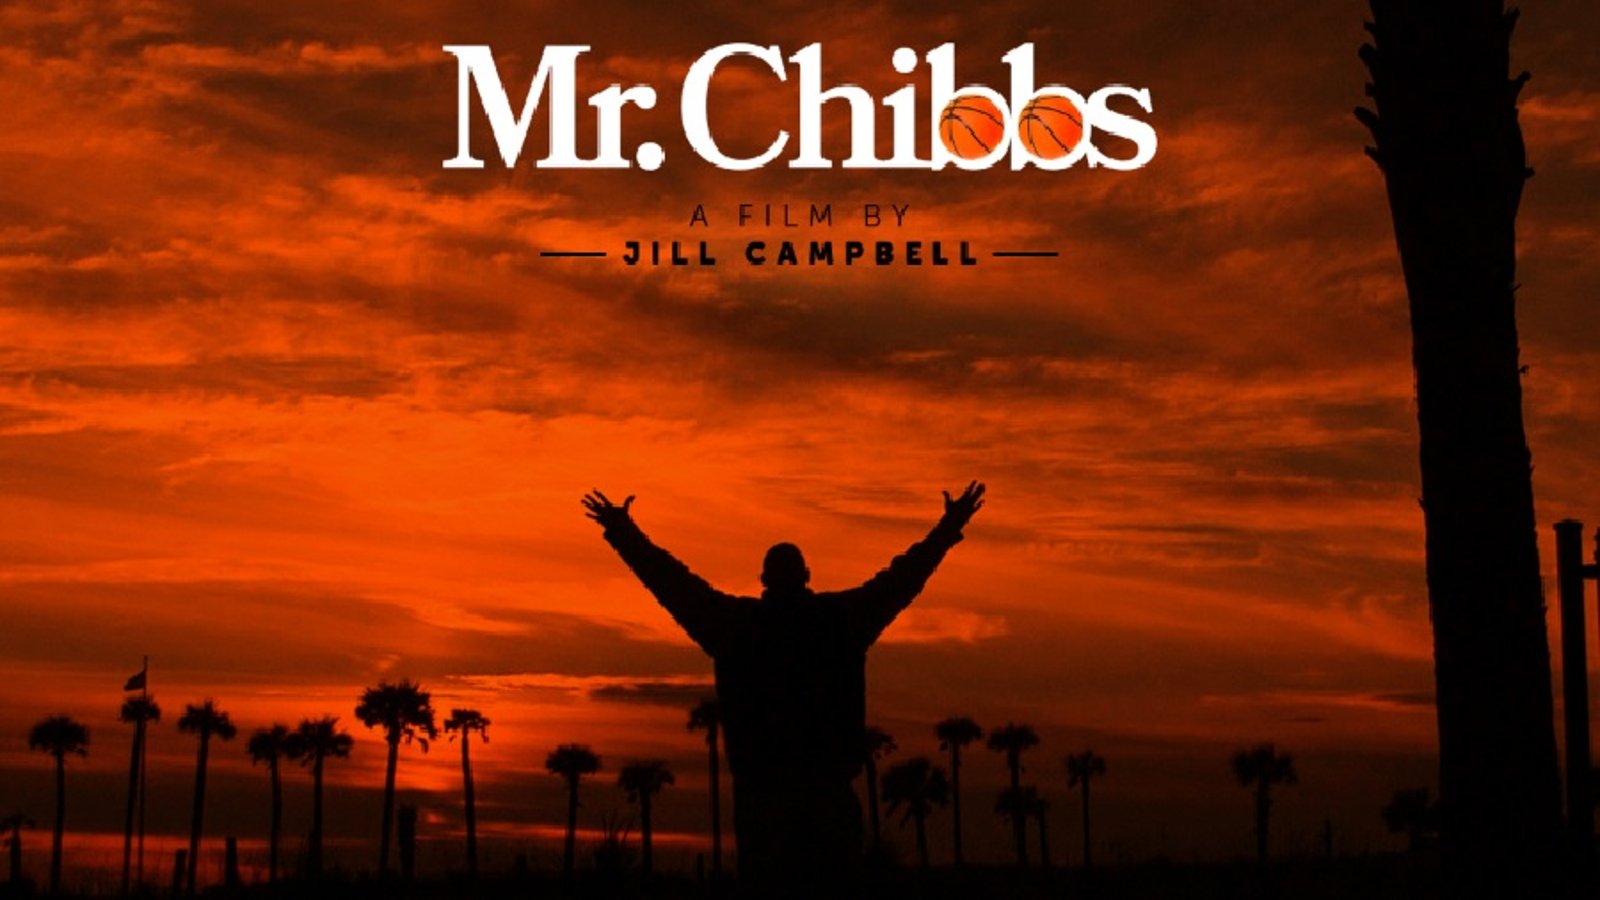 Mr. Chibbs - A Sports Legend Searches for a Meaningful Future